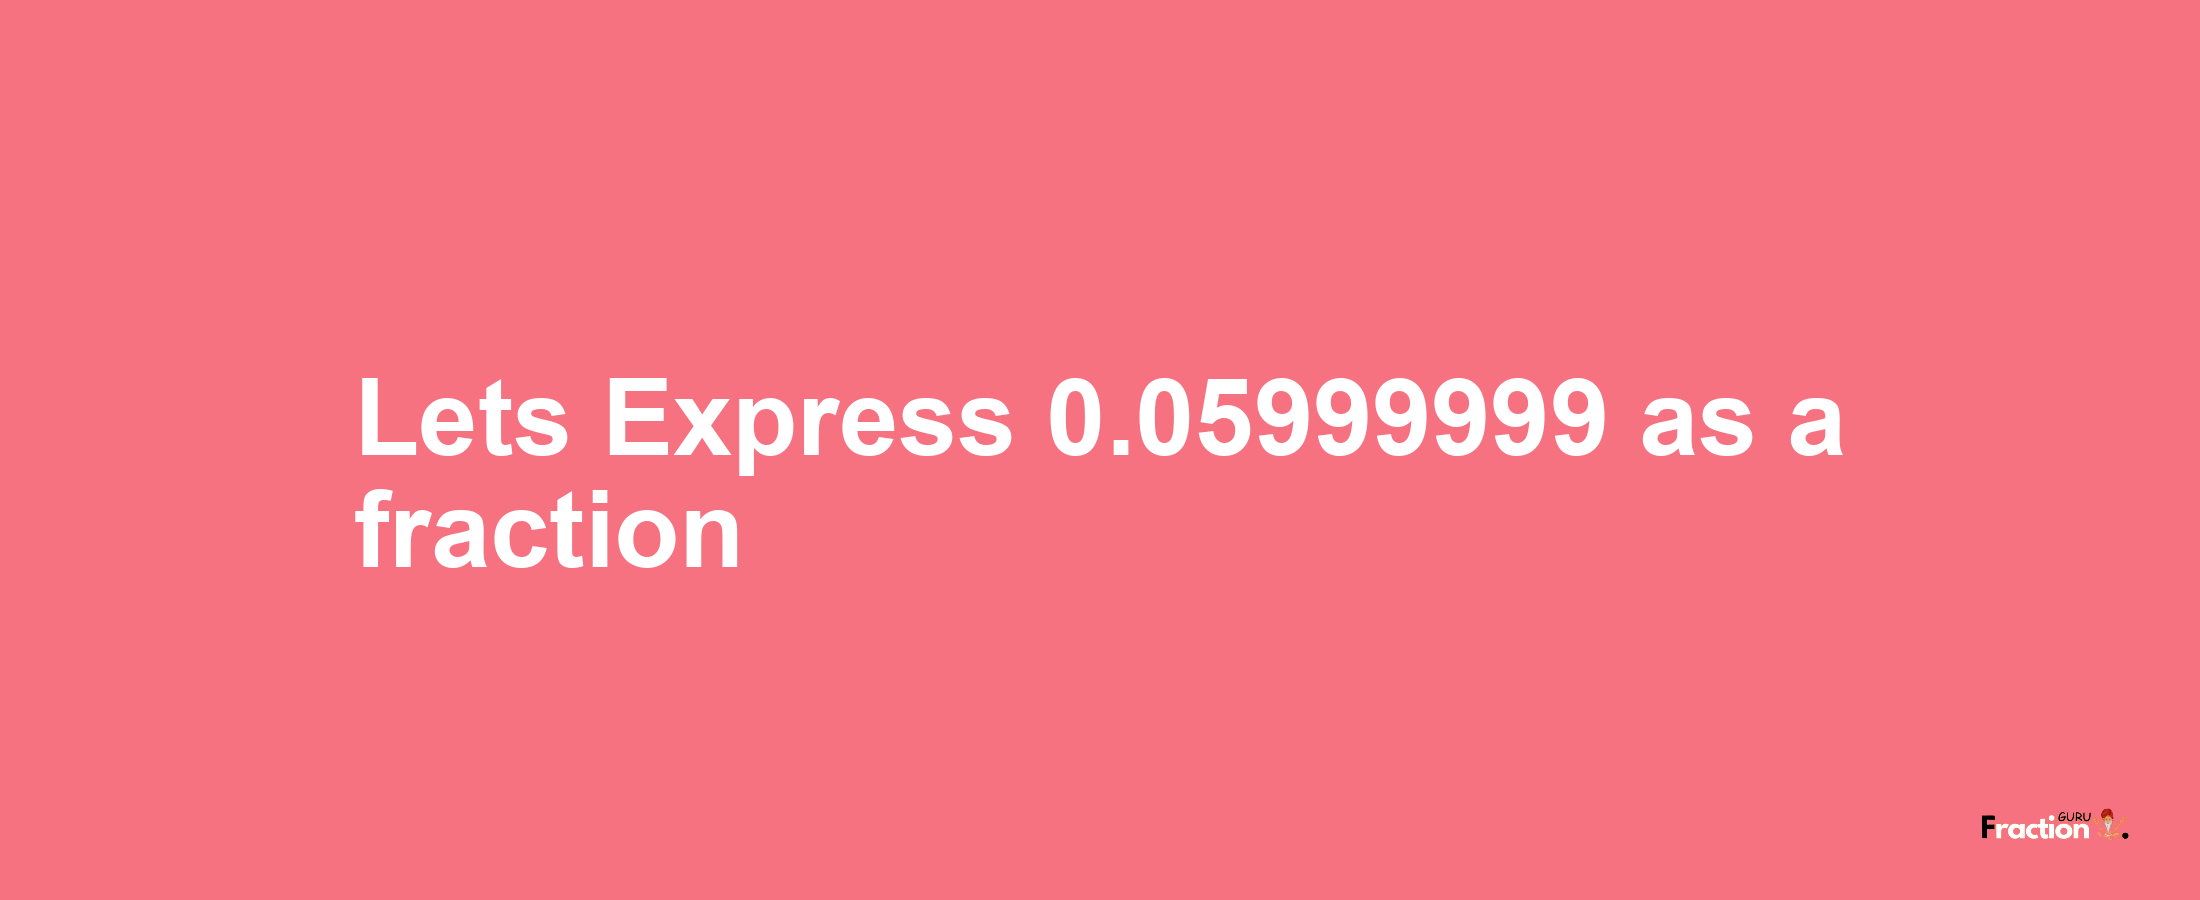 Lets Express 0.05999999 as afraction